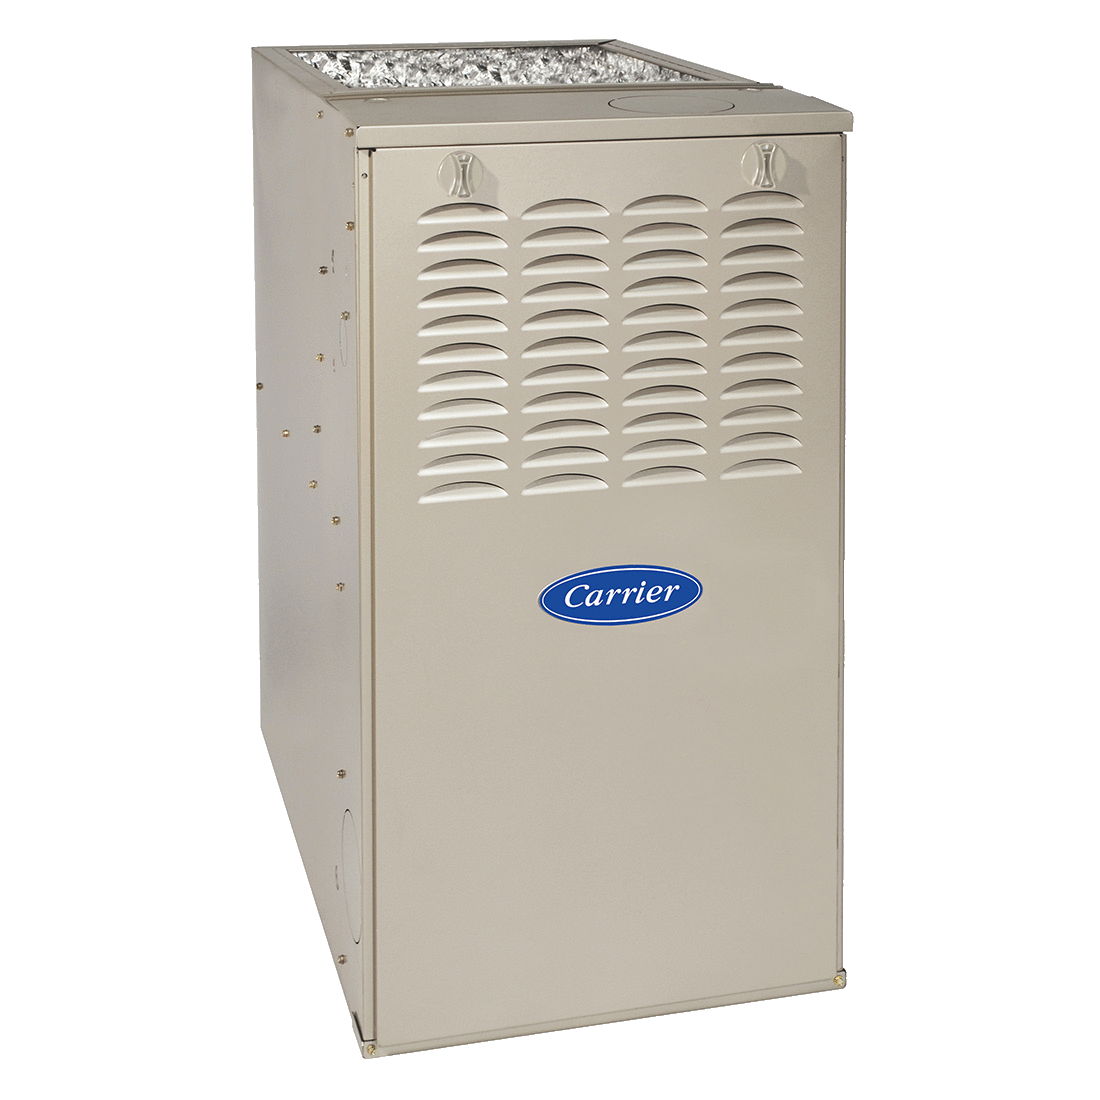 performance-80-gas-furnace-58tp-carrier-home-comfort